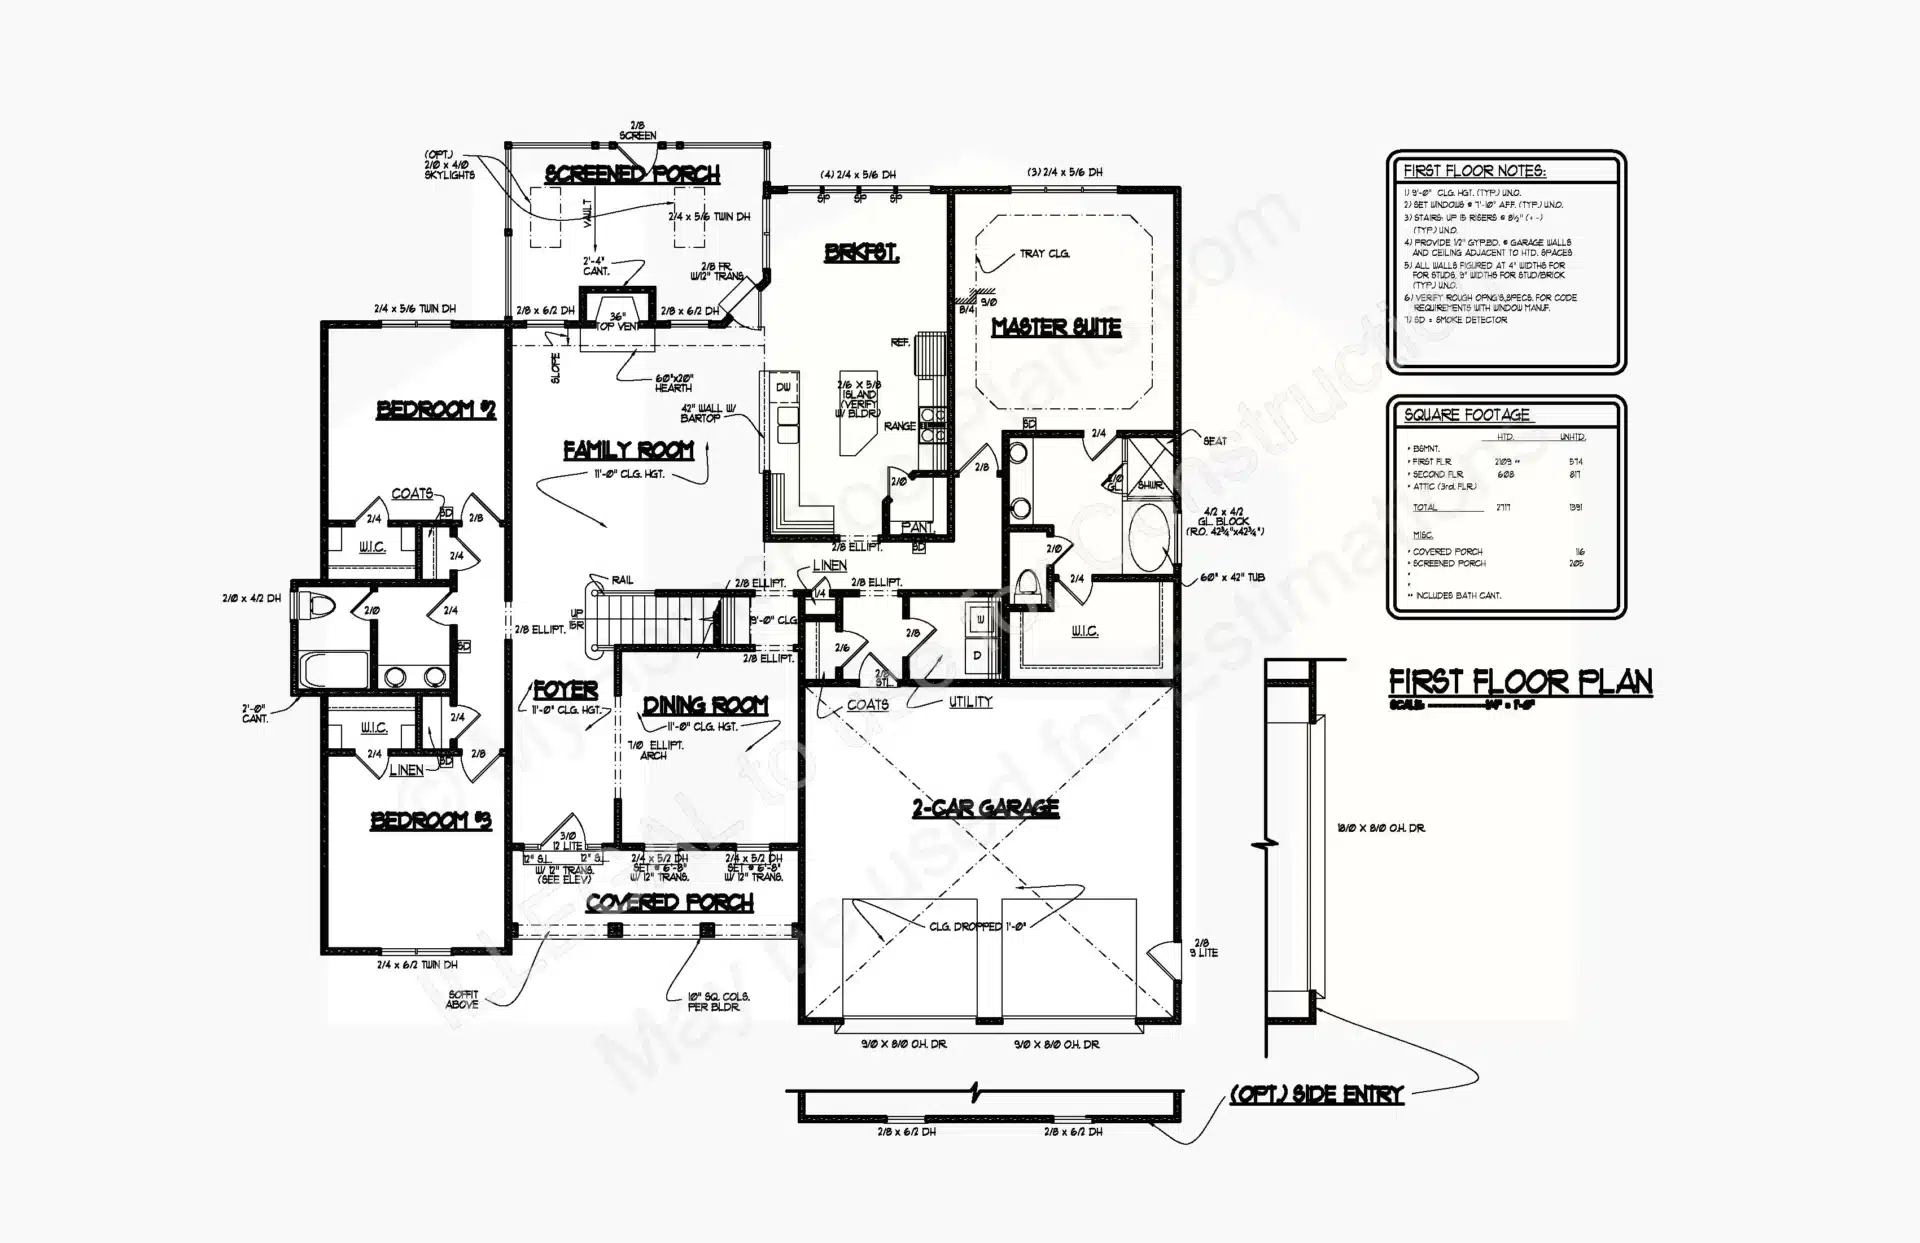 12-2289 my home floor plans_Page_06